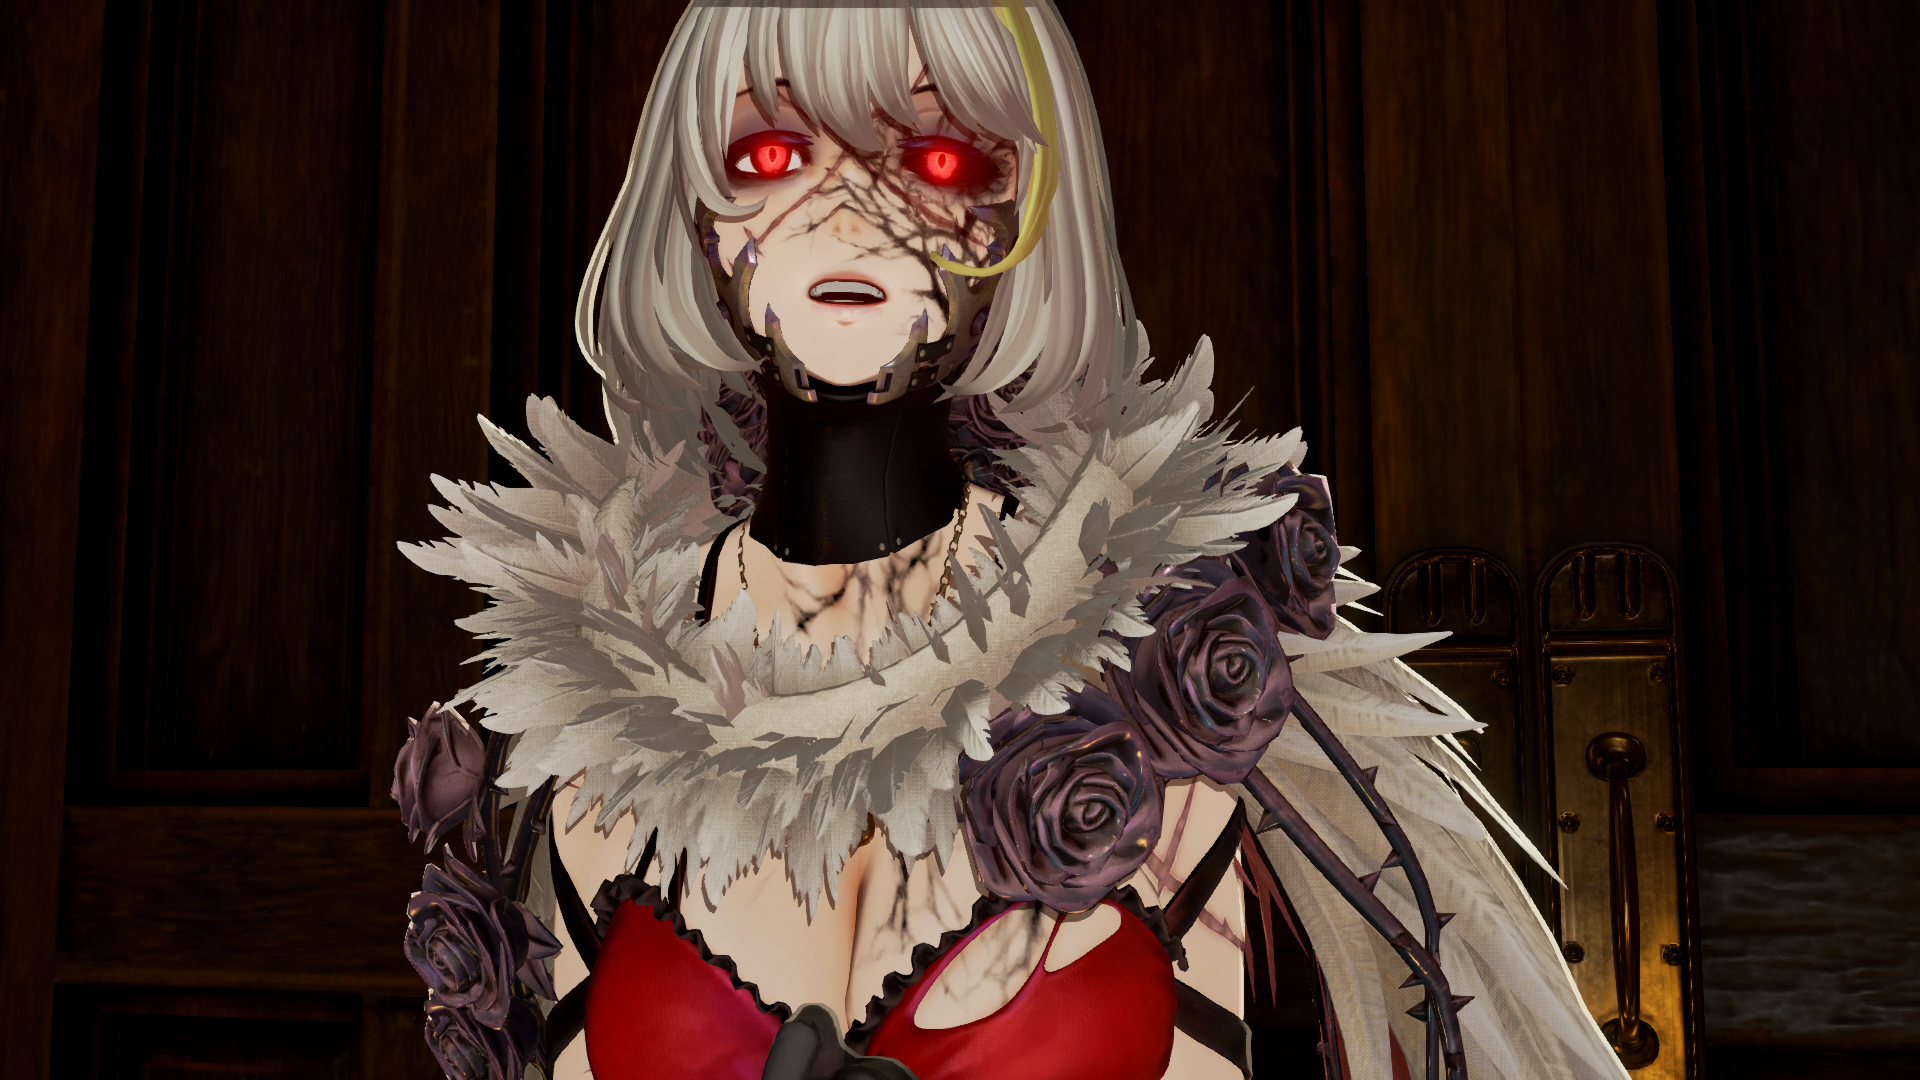 Code Vein E3 2019 Hands-on Preview